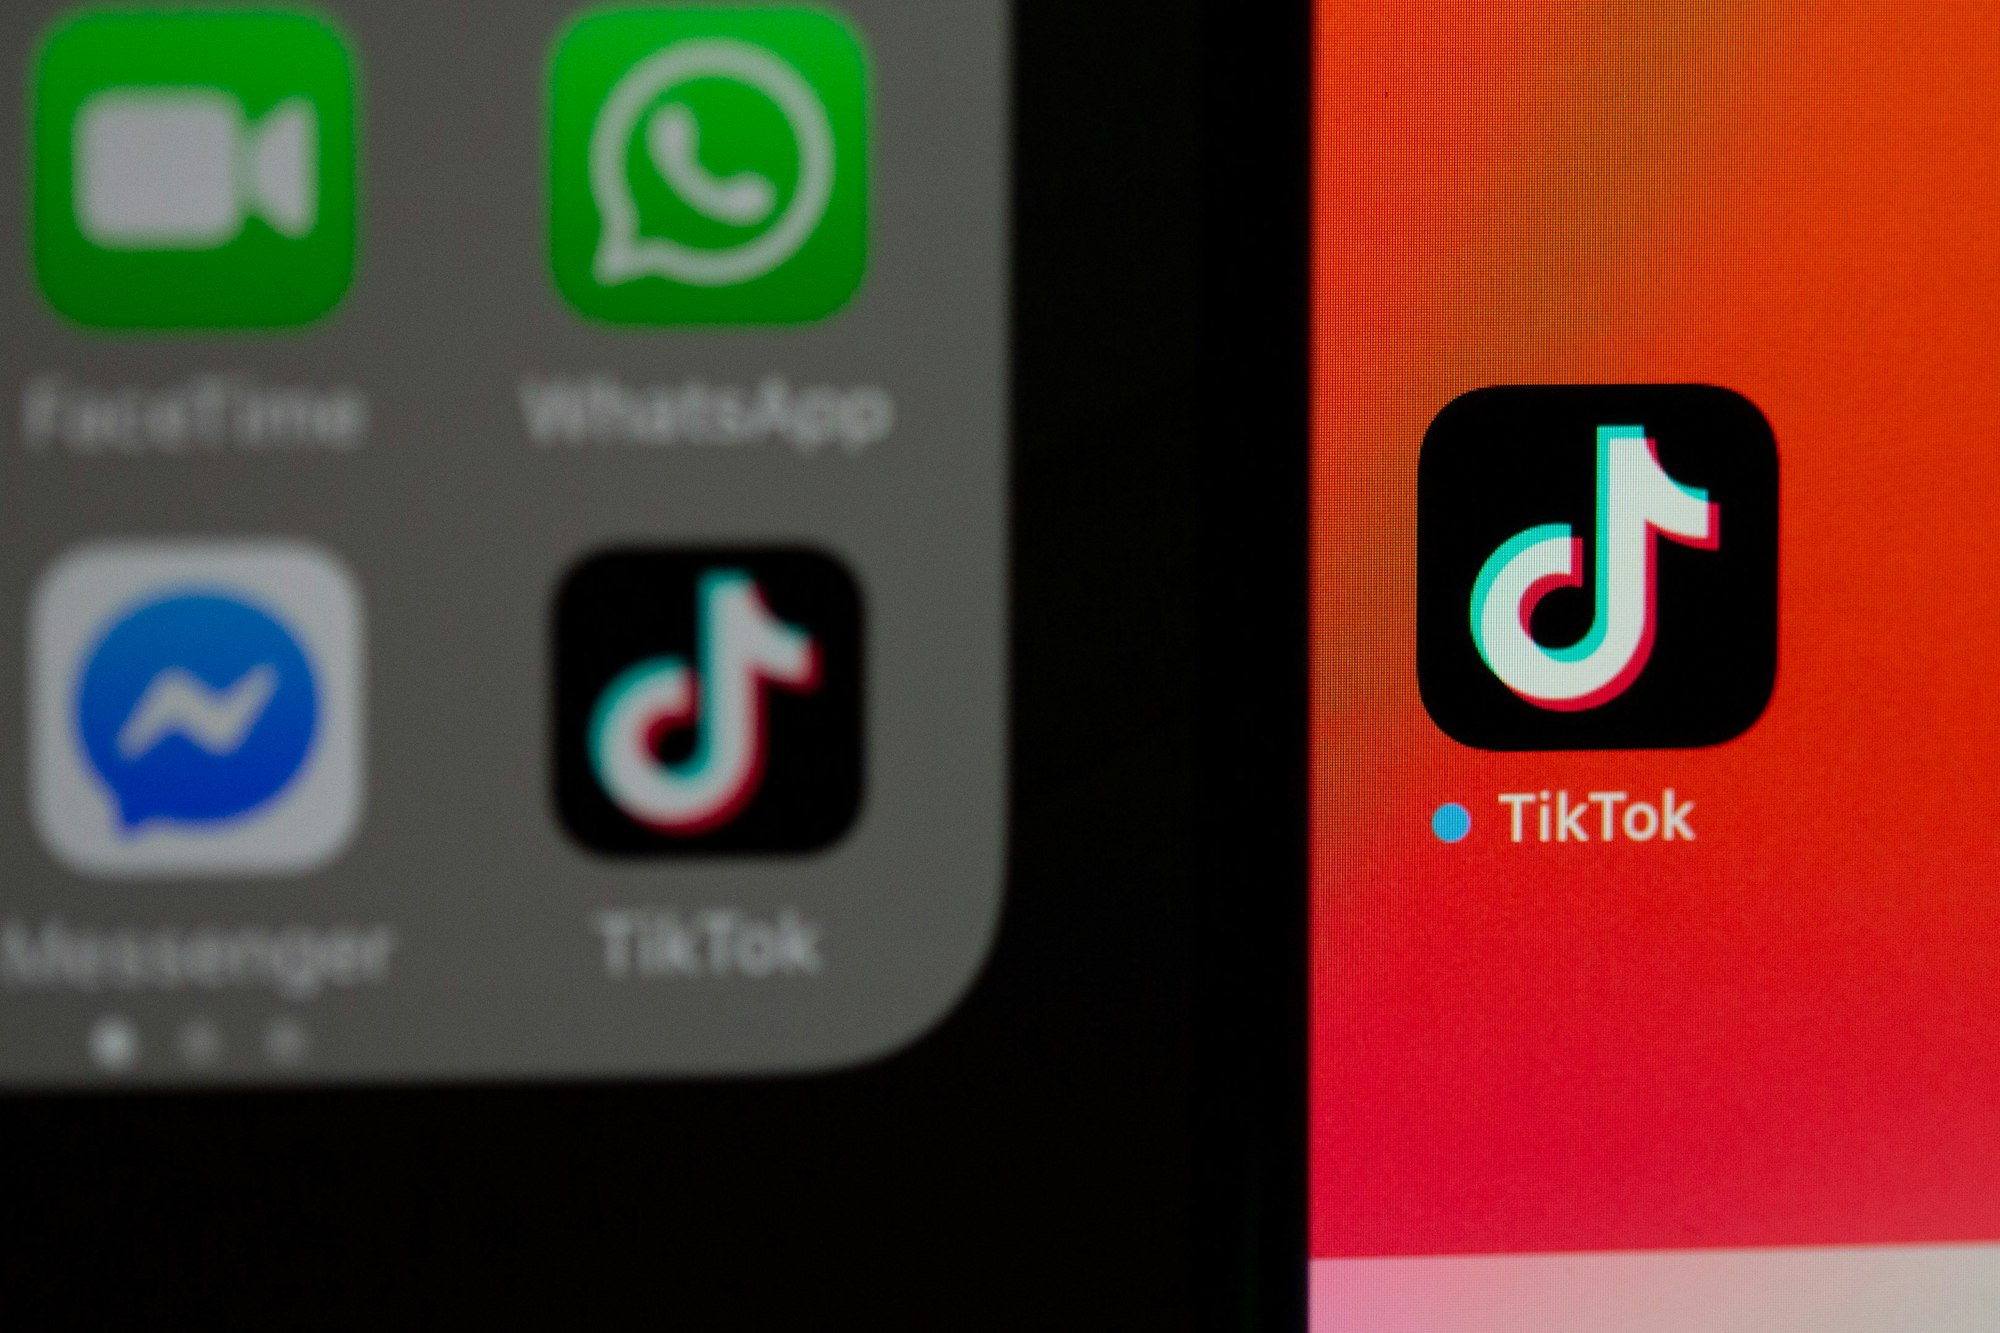 Enhance Your TikTok Presence Combined with AI Voice Generator Freetts